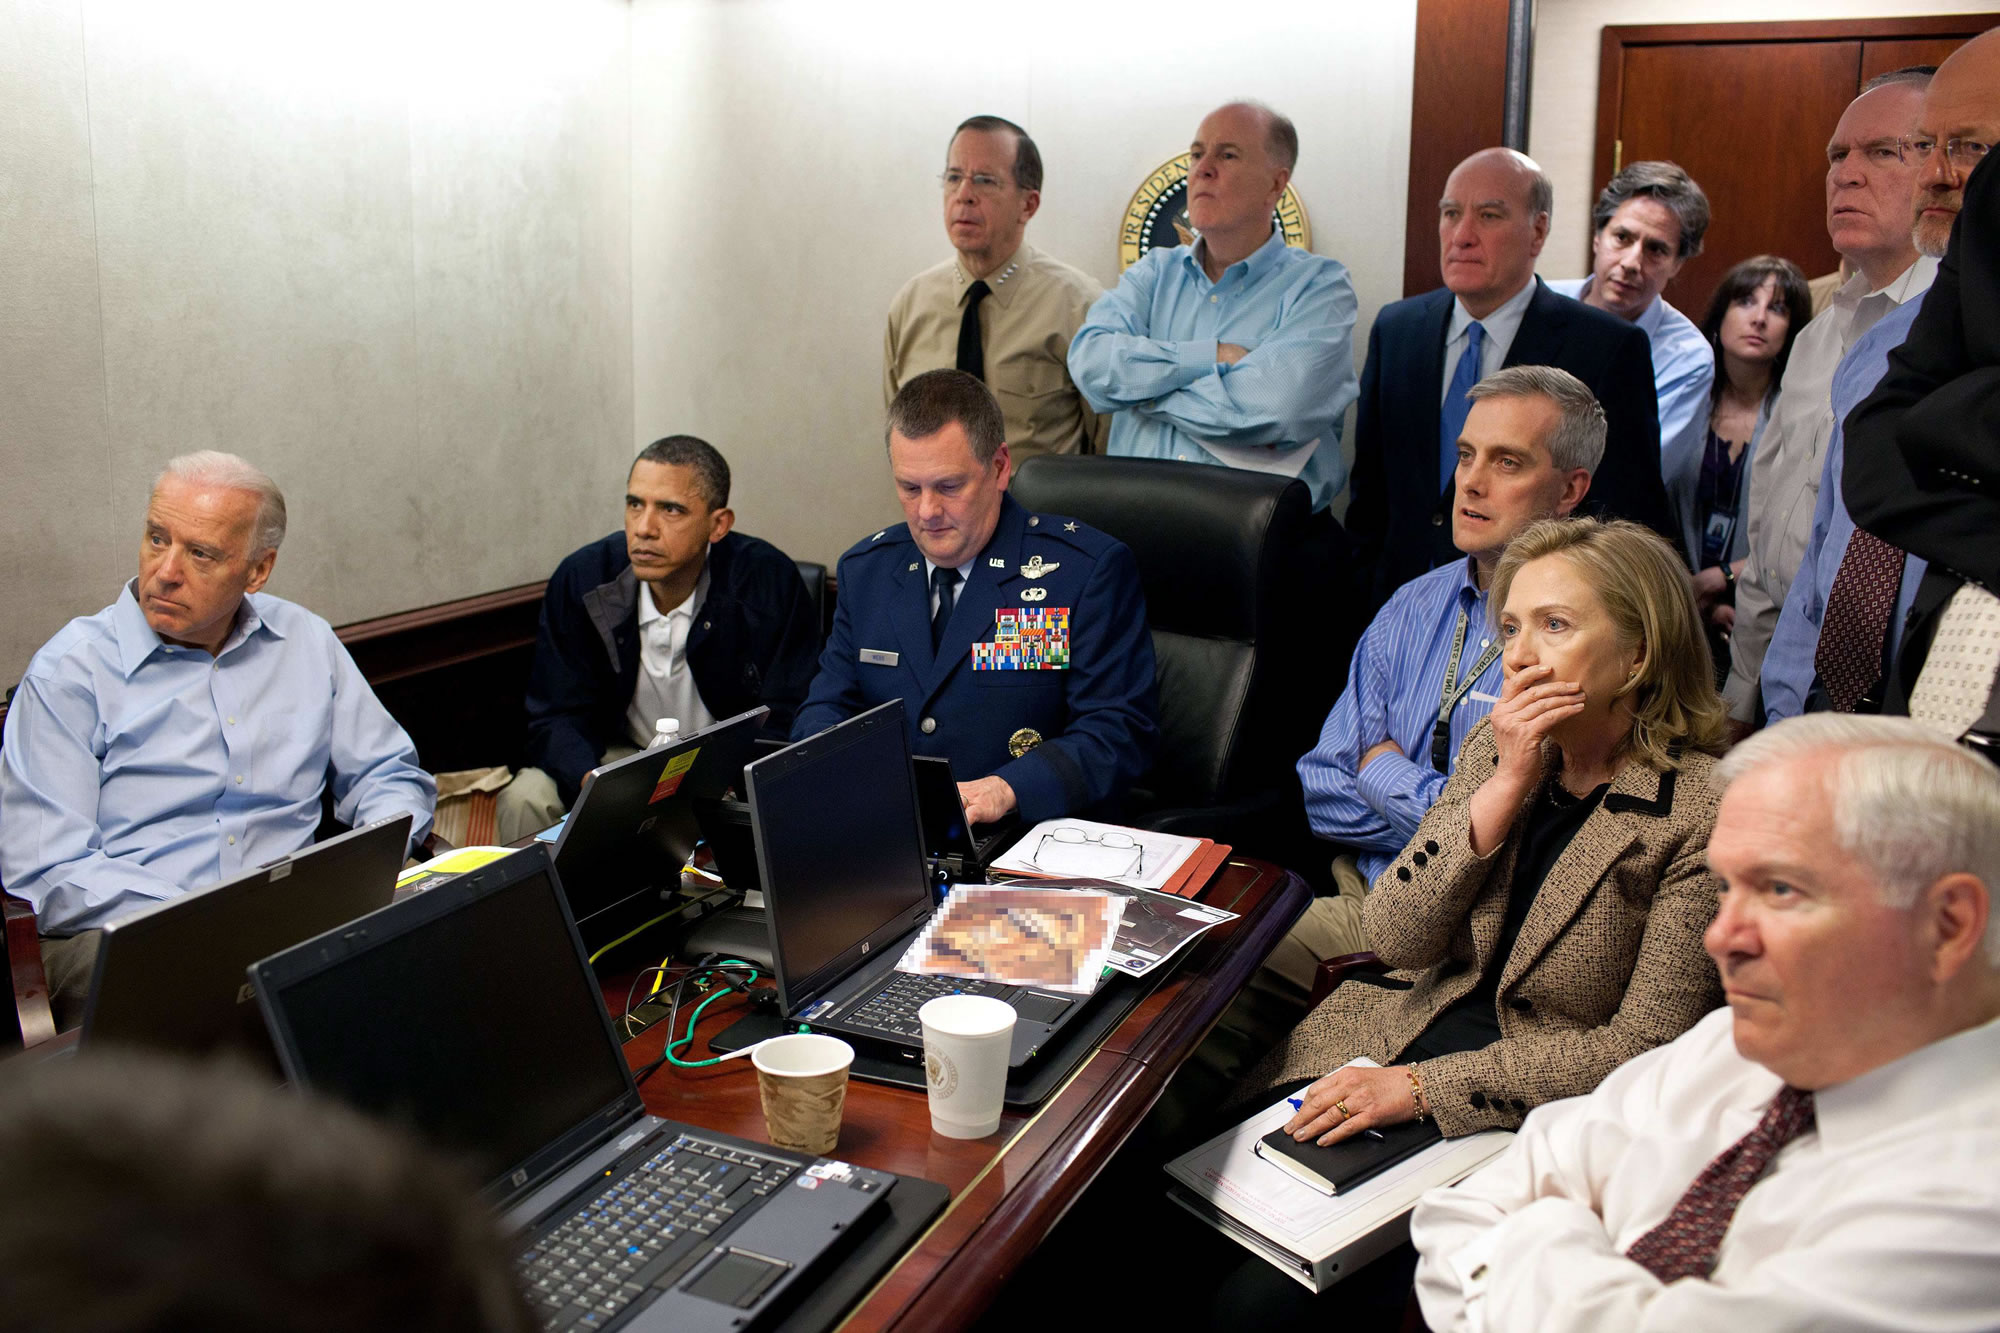 Former Secretary of State Hillary Rodham Clinton, right with hand covering mouth, President Barack Obama, second from left, Vice President Joe Biden, left, Secretary of Defense Robert Gates, right, and members of the national security team watch an update of the mission against Osama bin Laden in the White House Situation Room in Washington in 2011.